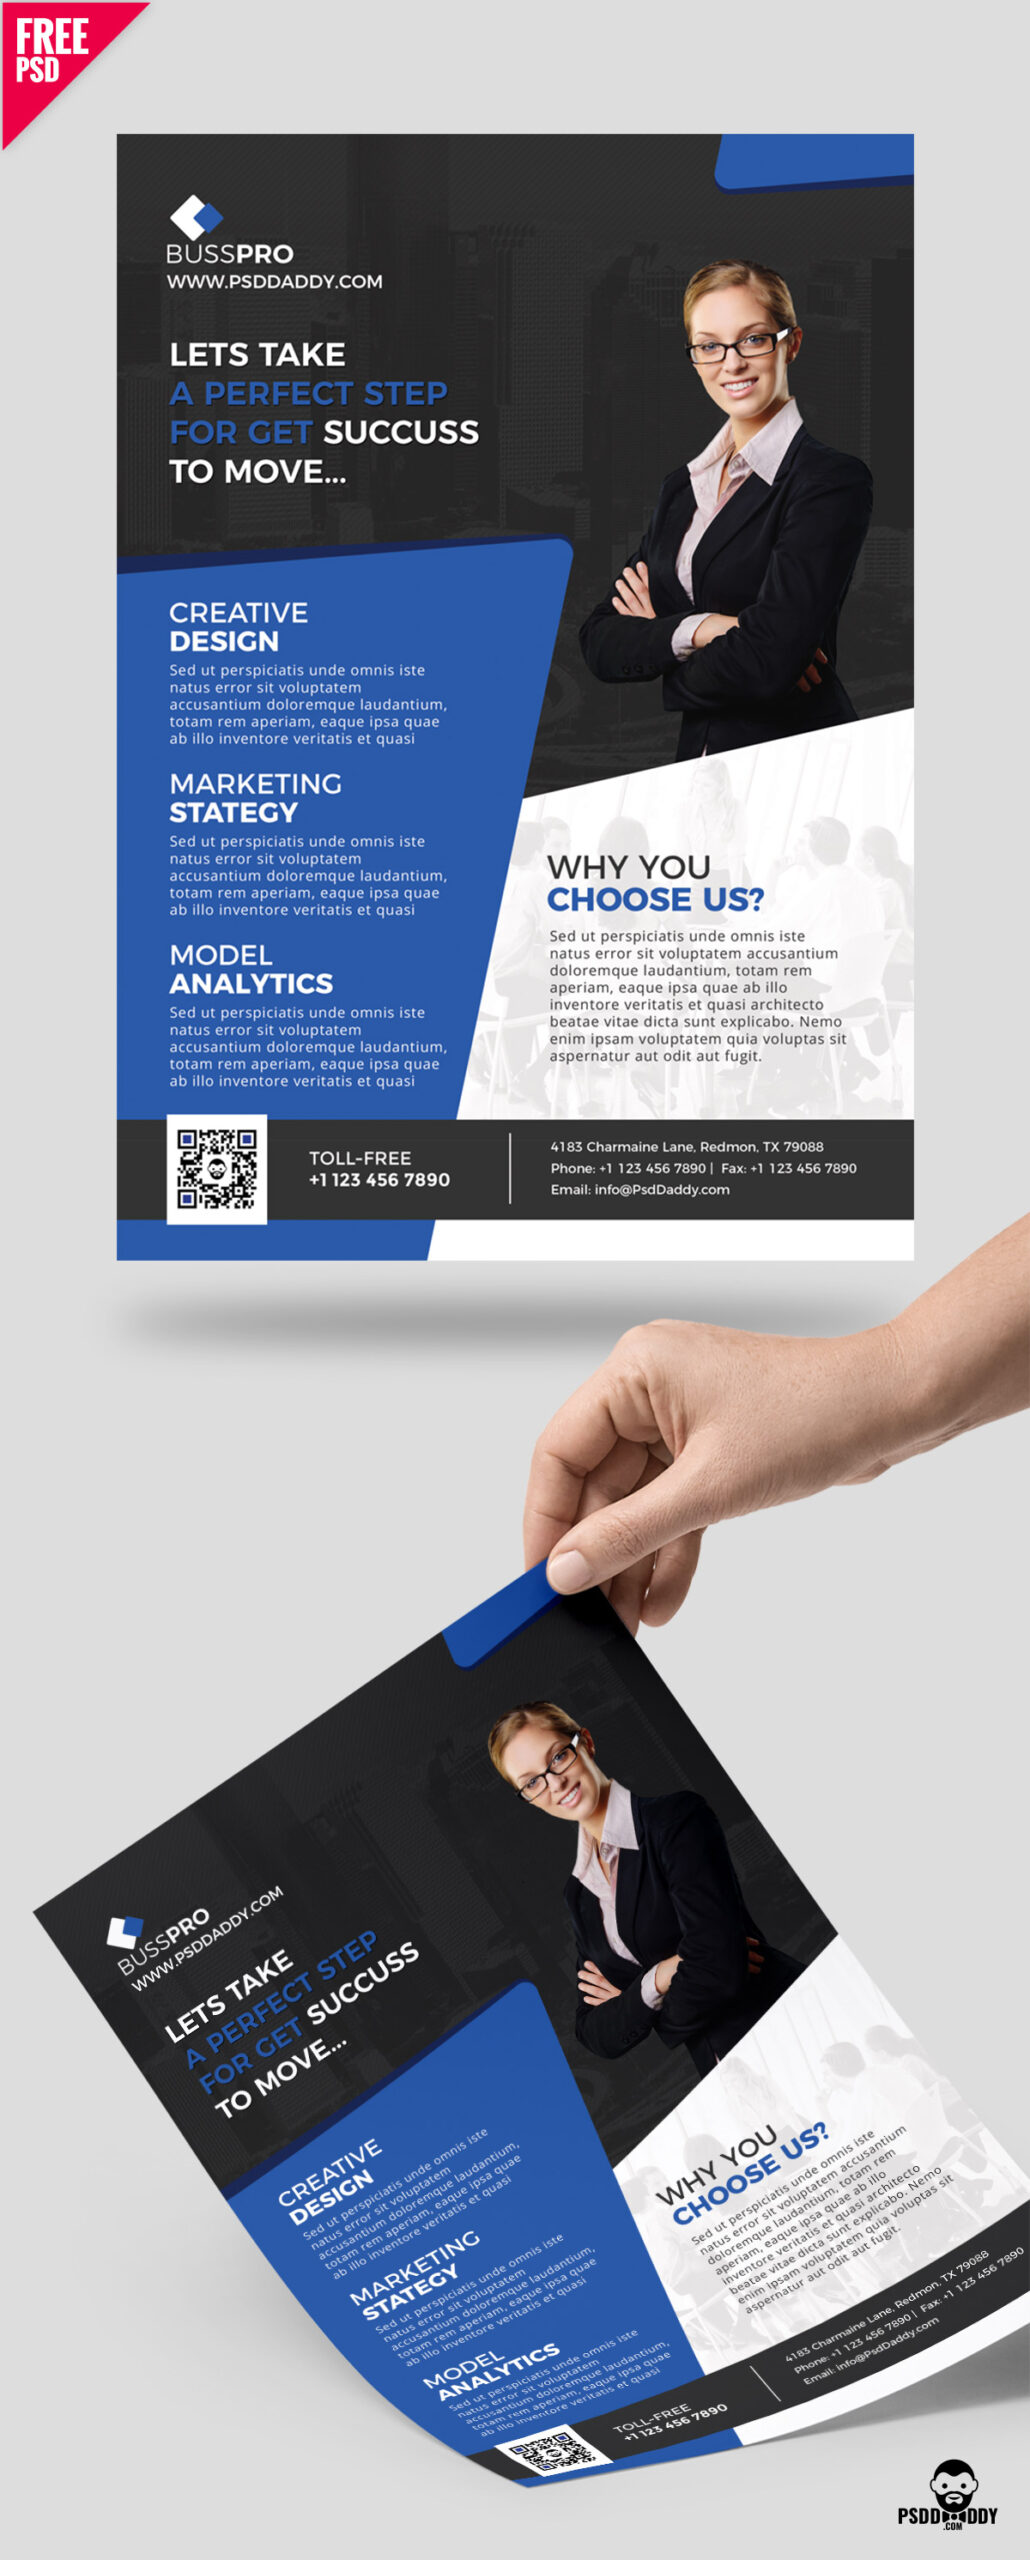 Download] Business Flyer Template Free Psd | Psddaddy Regarding New Business Flyer Template Free